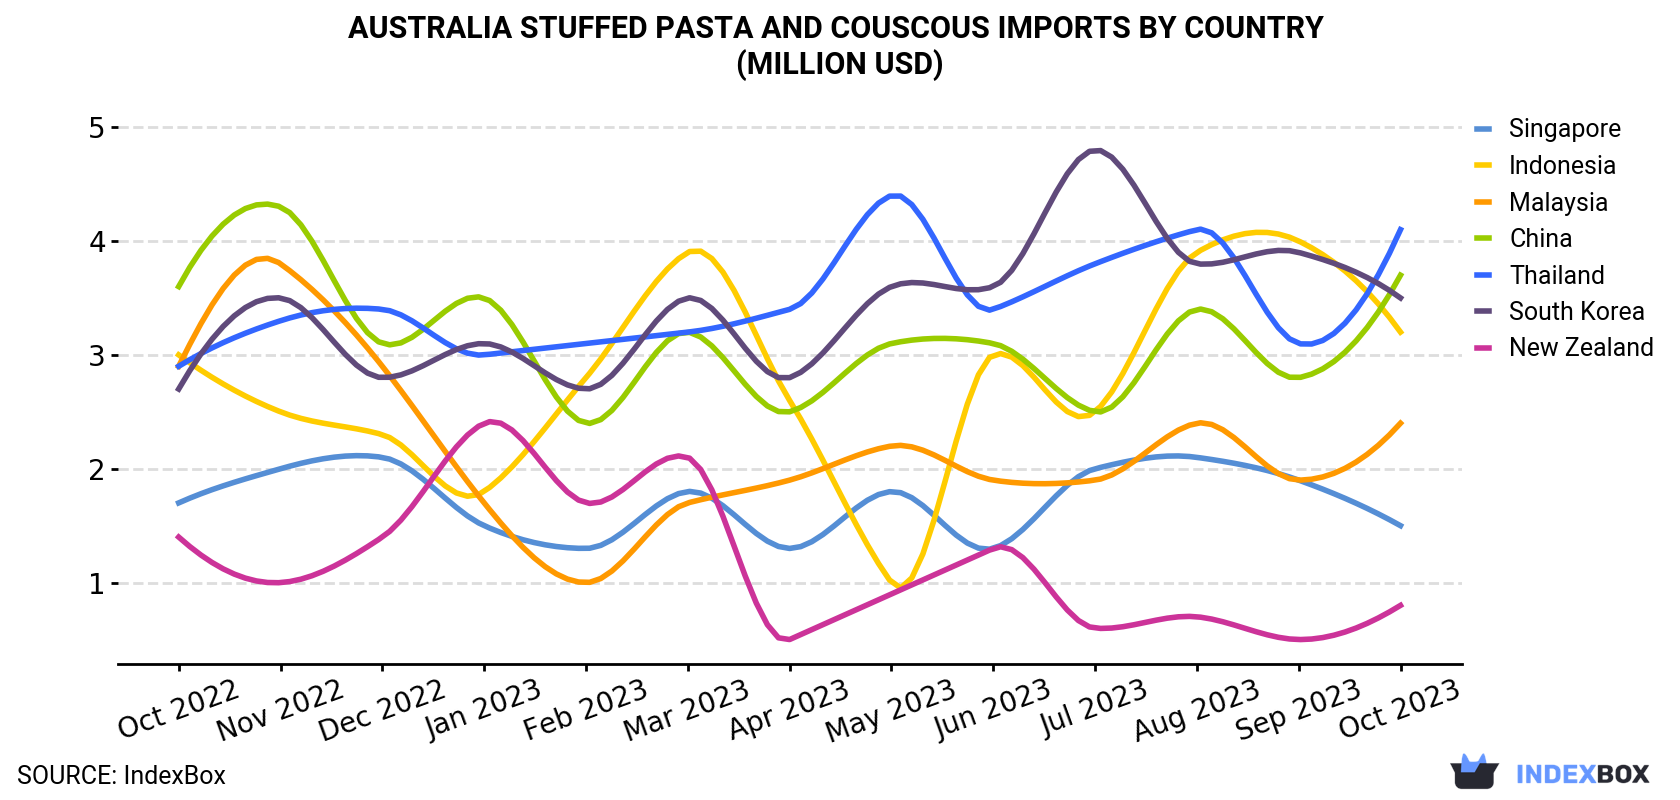 Australia Stuffed Pasta and Couscous Imports By Country (Million USD)